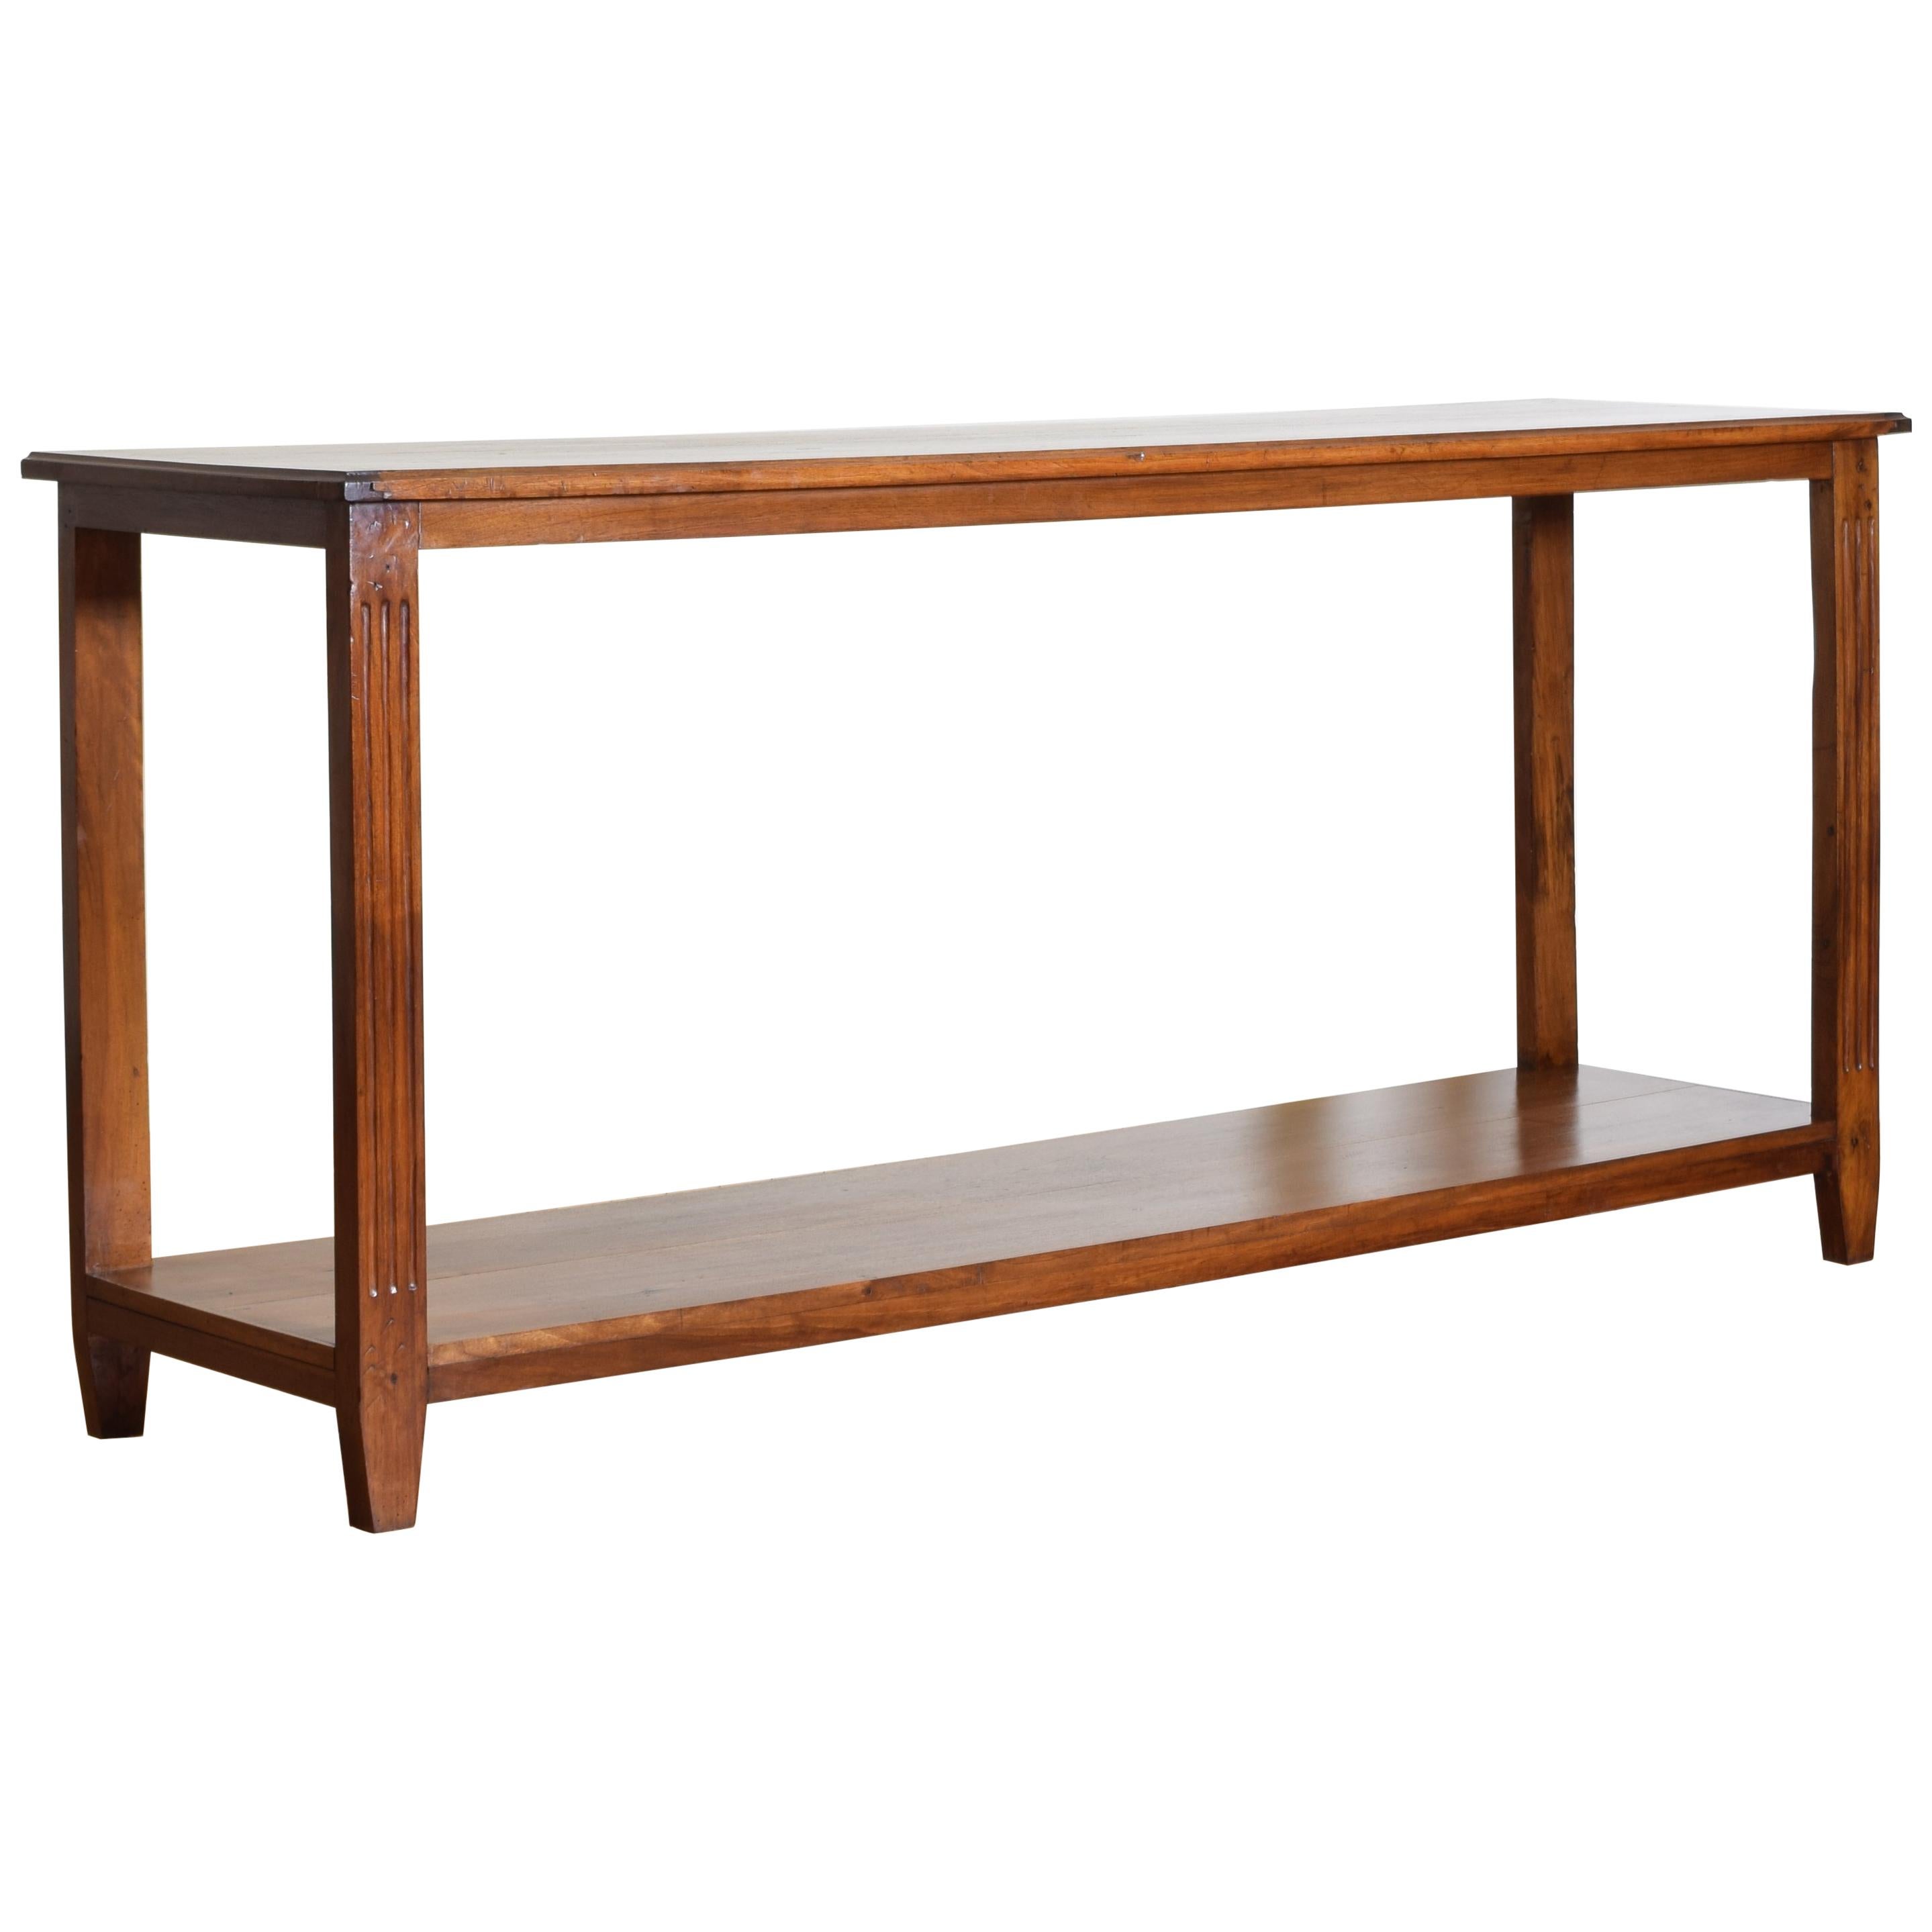 French Neoclassic Walnut Two-Tier Console Table, Second Half of the 19th Century